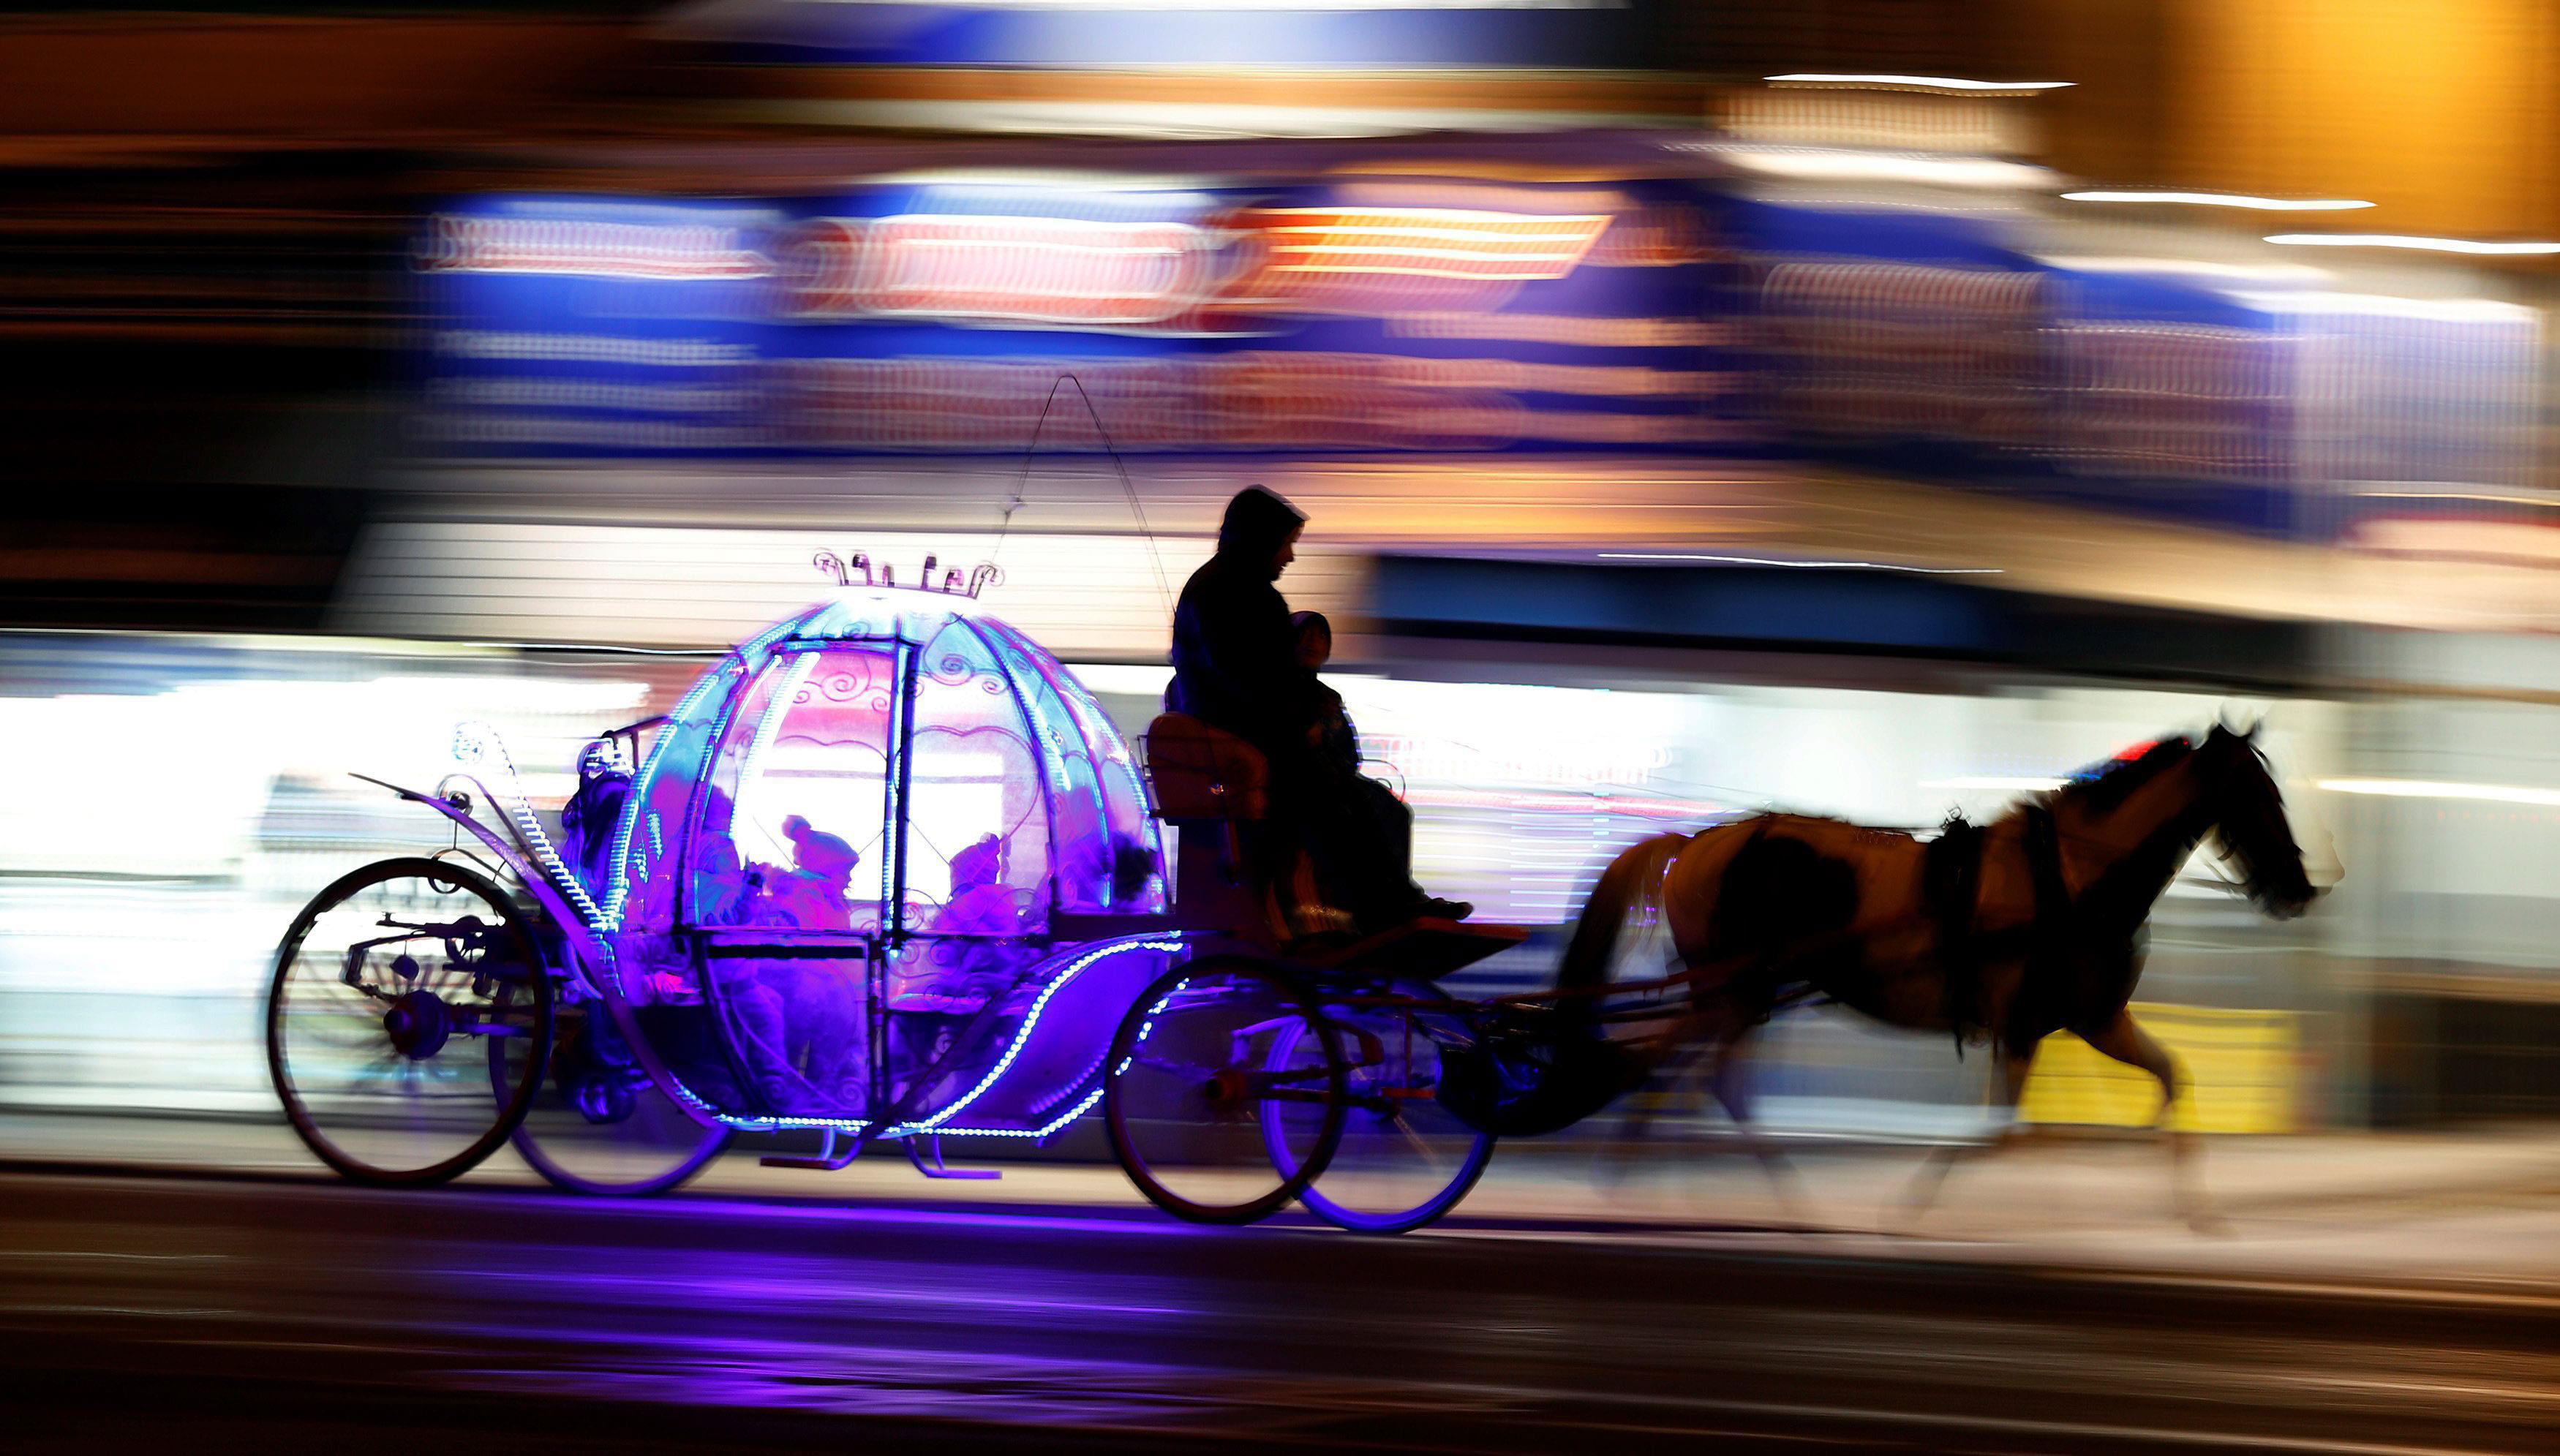 Children travel on an illuminated horse drawn carriage as they pass under the illuminations on the p